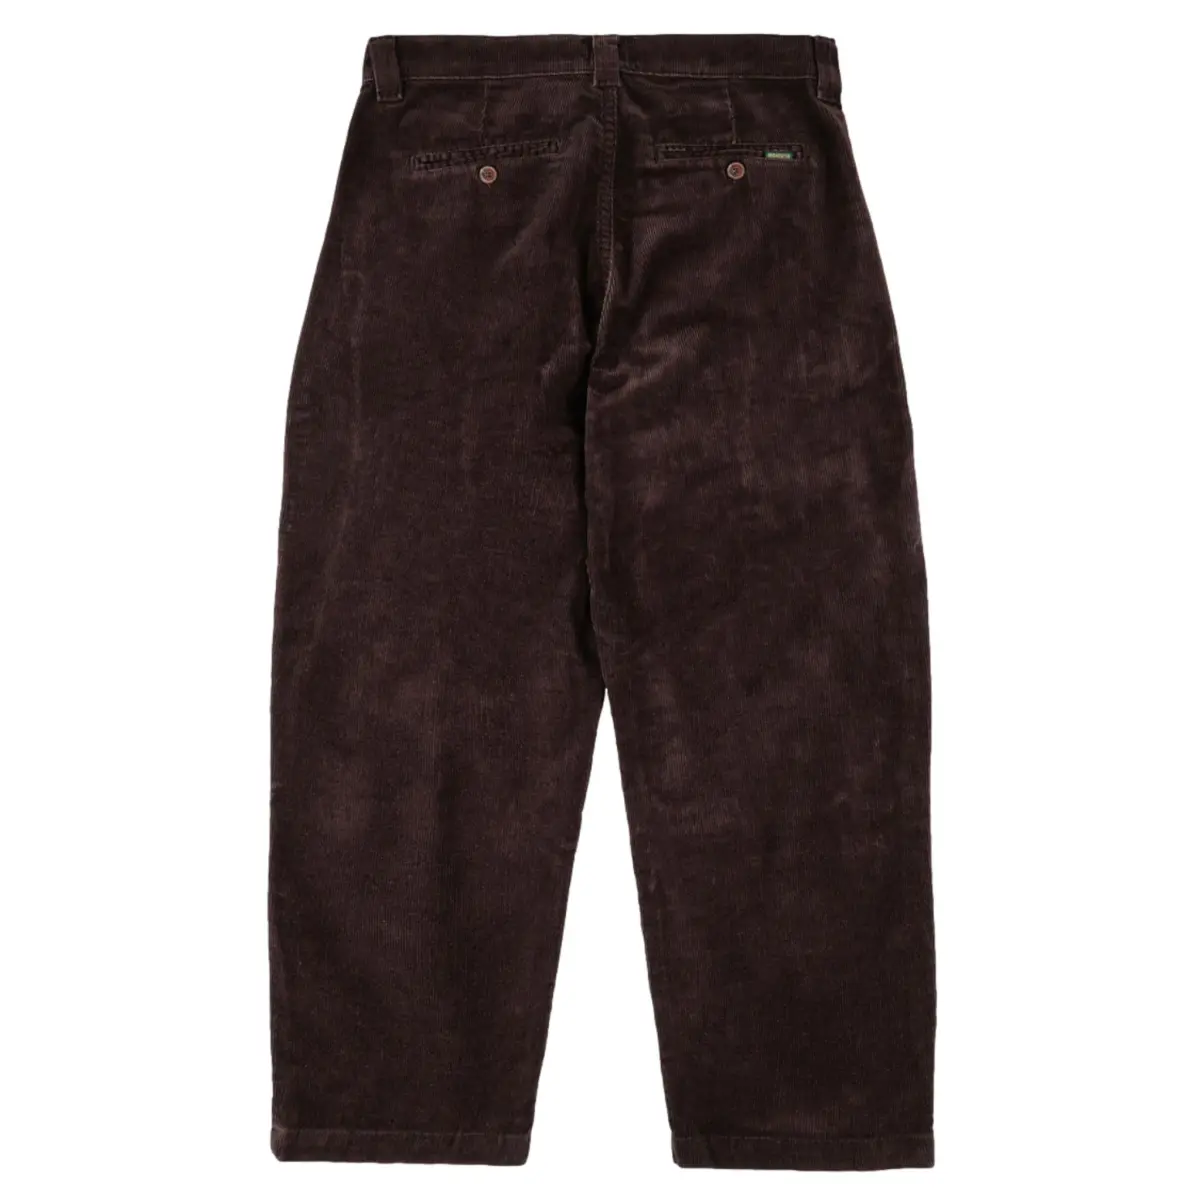 og chino pant choccolate 2_clipped_rev_1